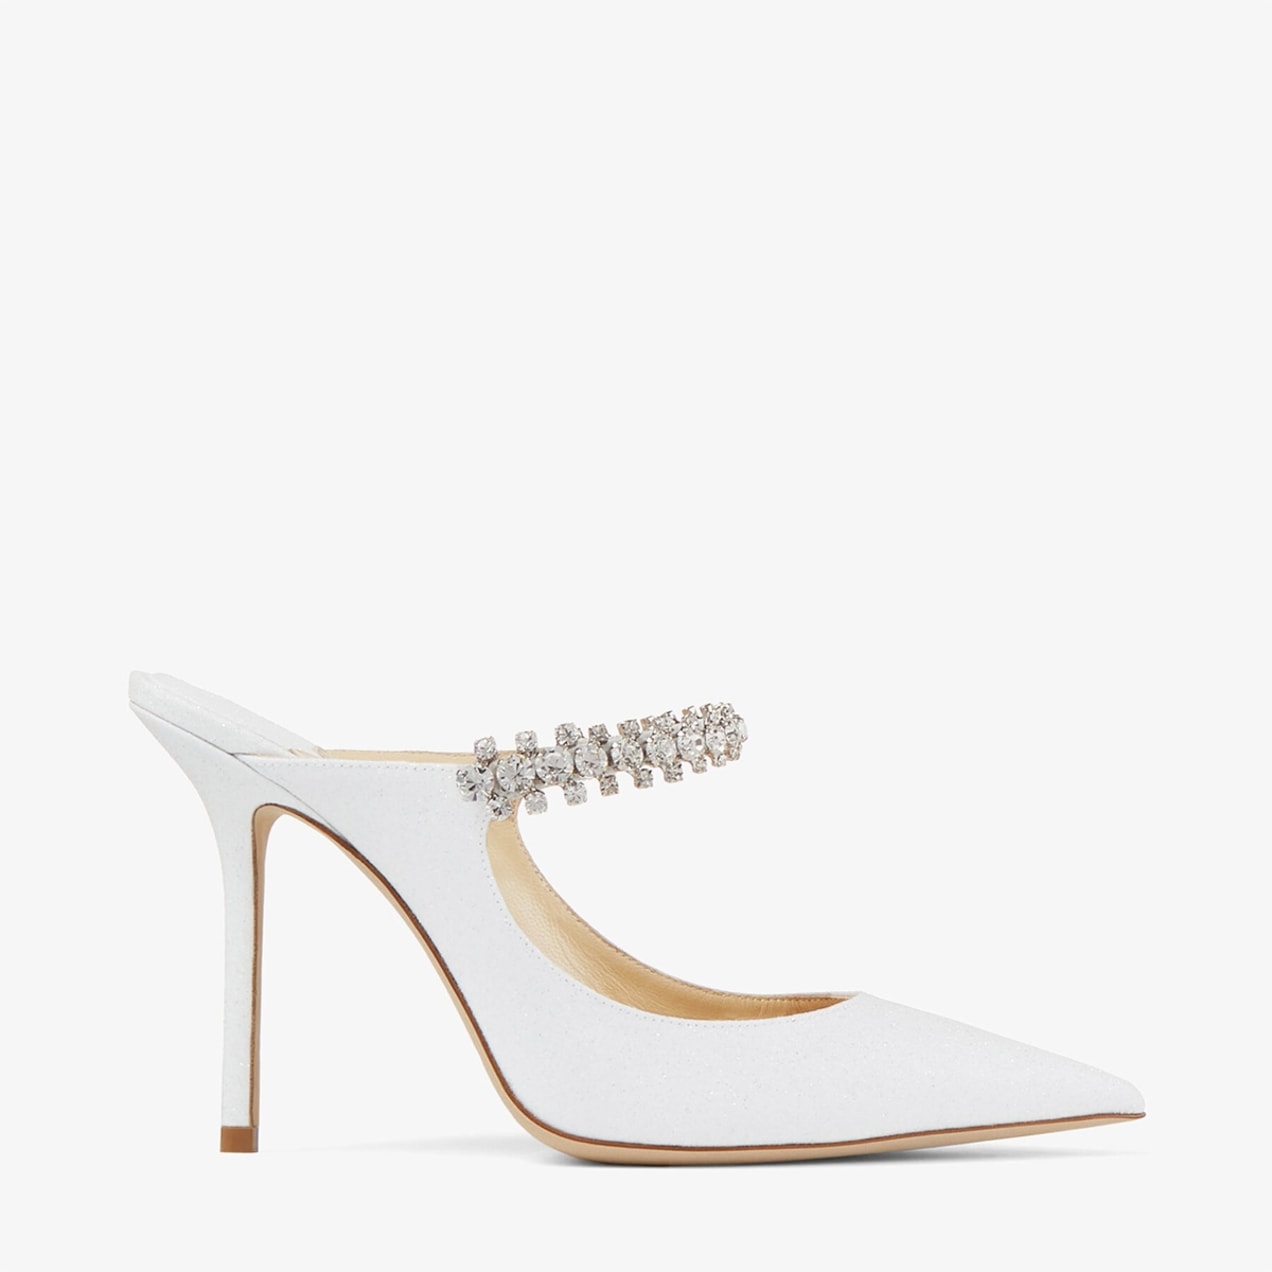 Jimmy Choo Bridal Shoes: The 10 Styles We're Lusting After (& How to  Customise Your Own) 